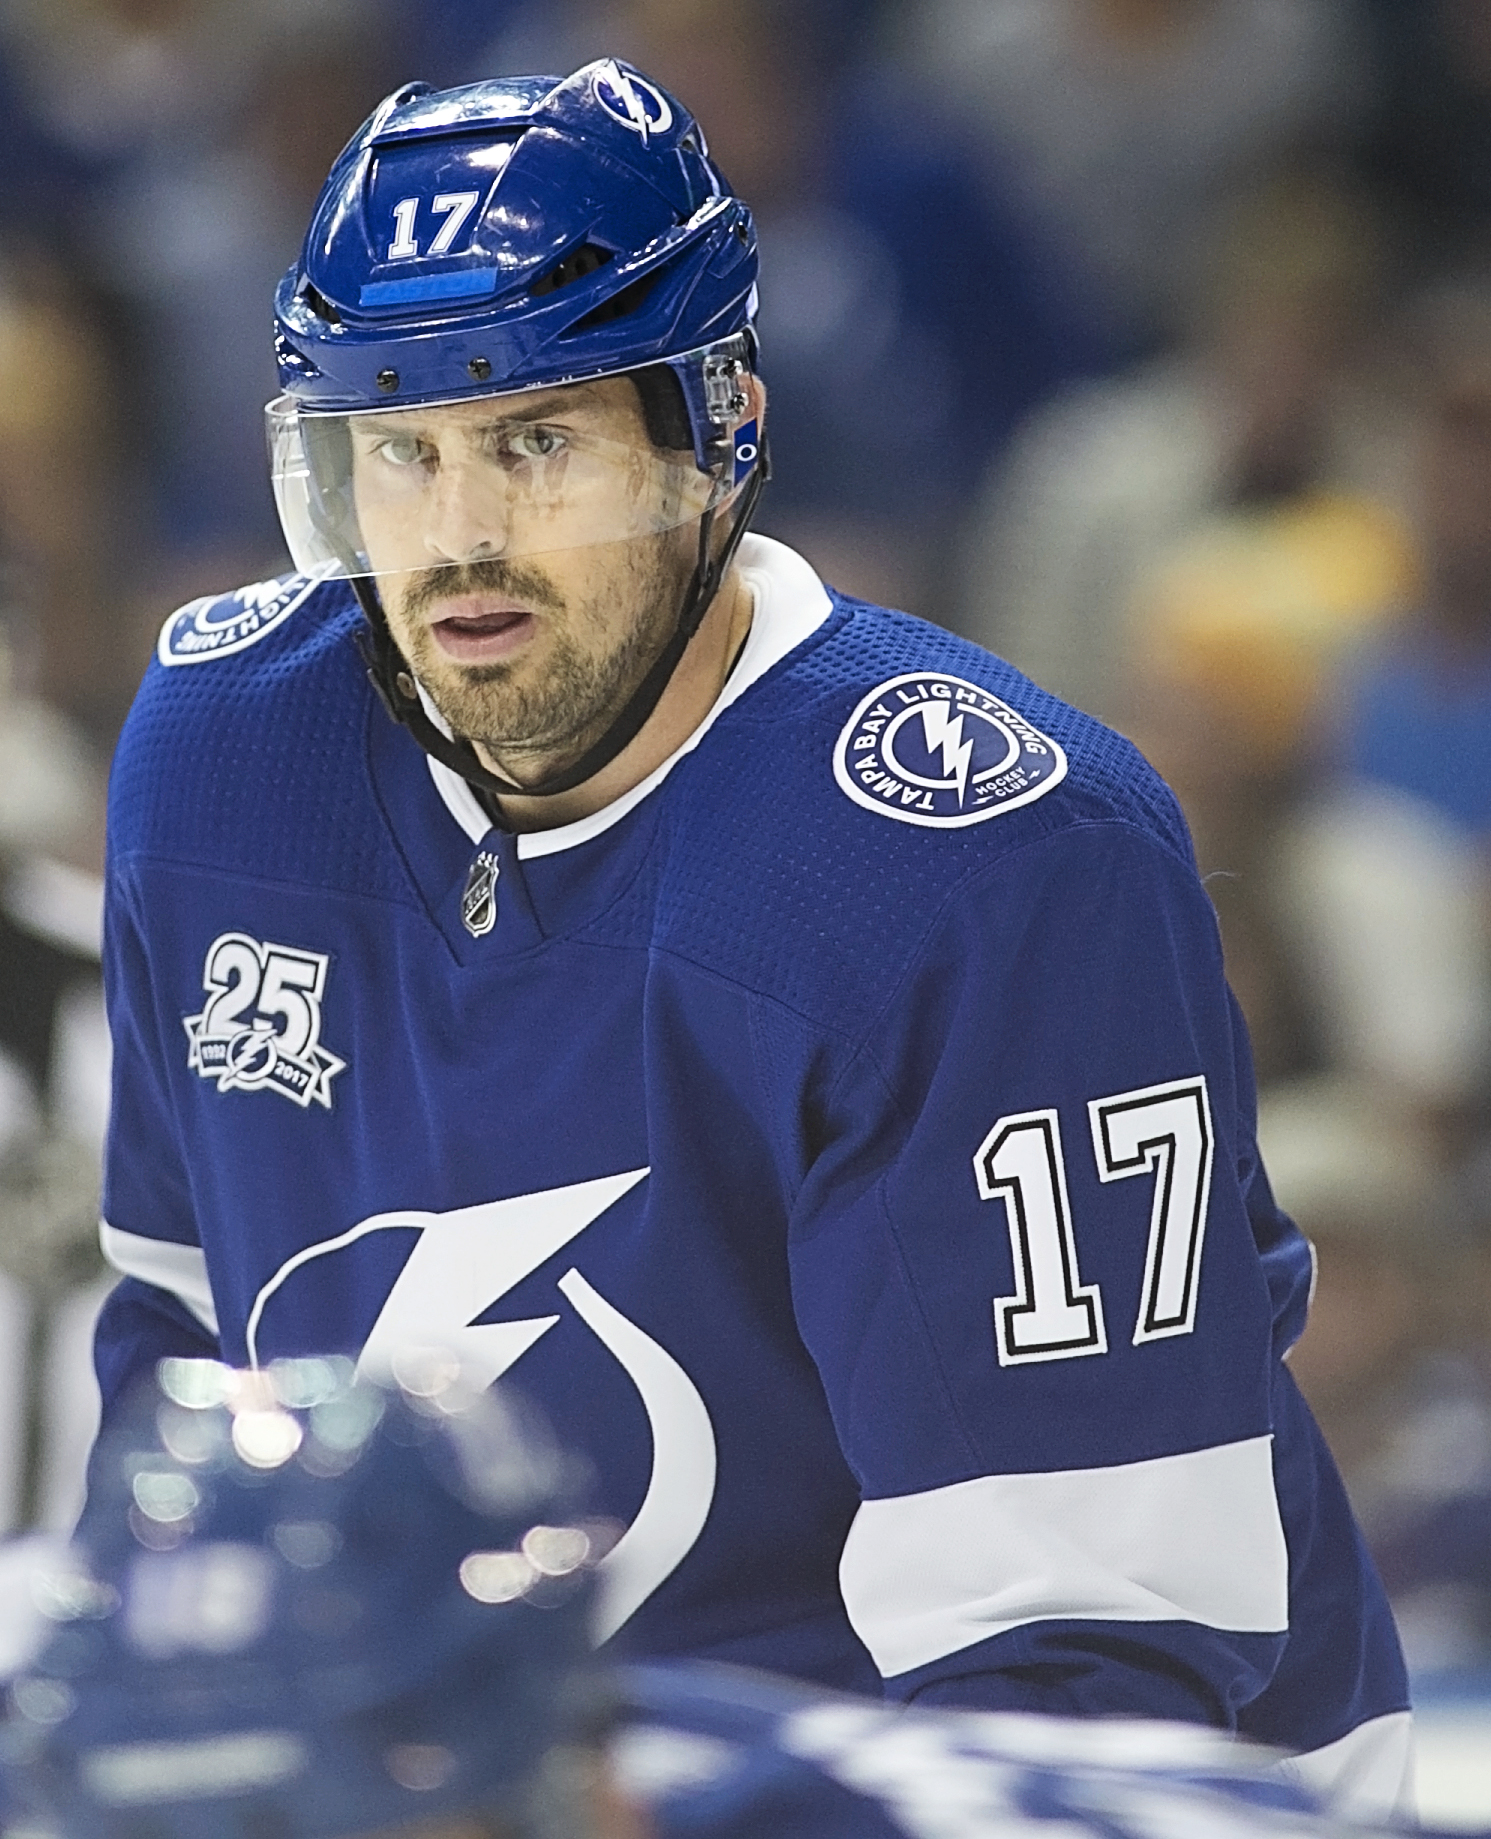 Killorn has been the Bolts' best offensive player./CARMEN MANDATO